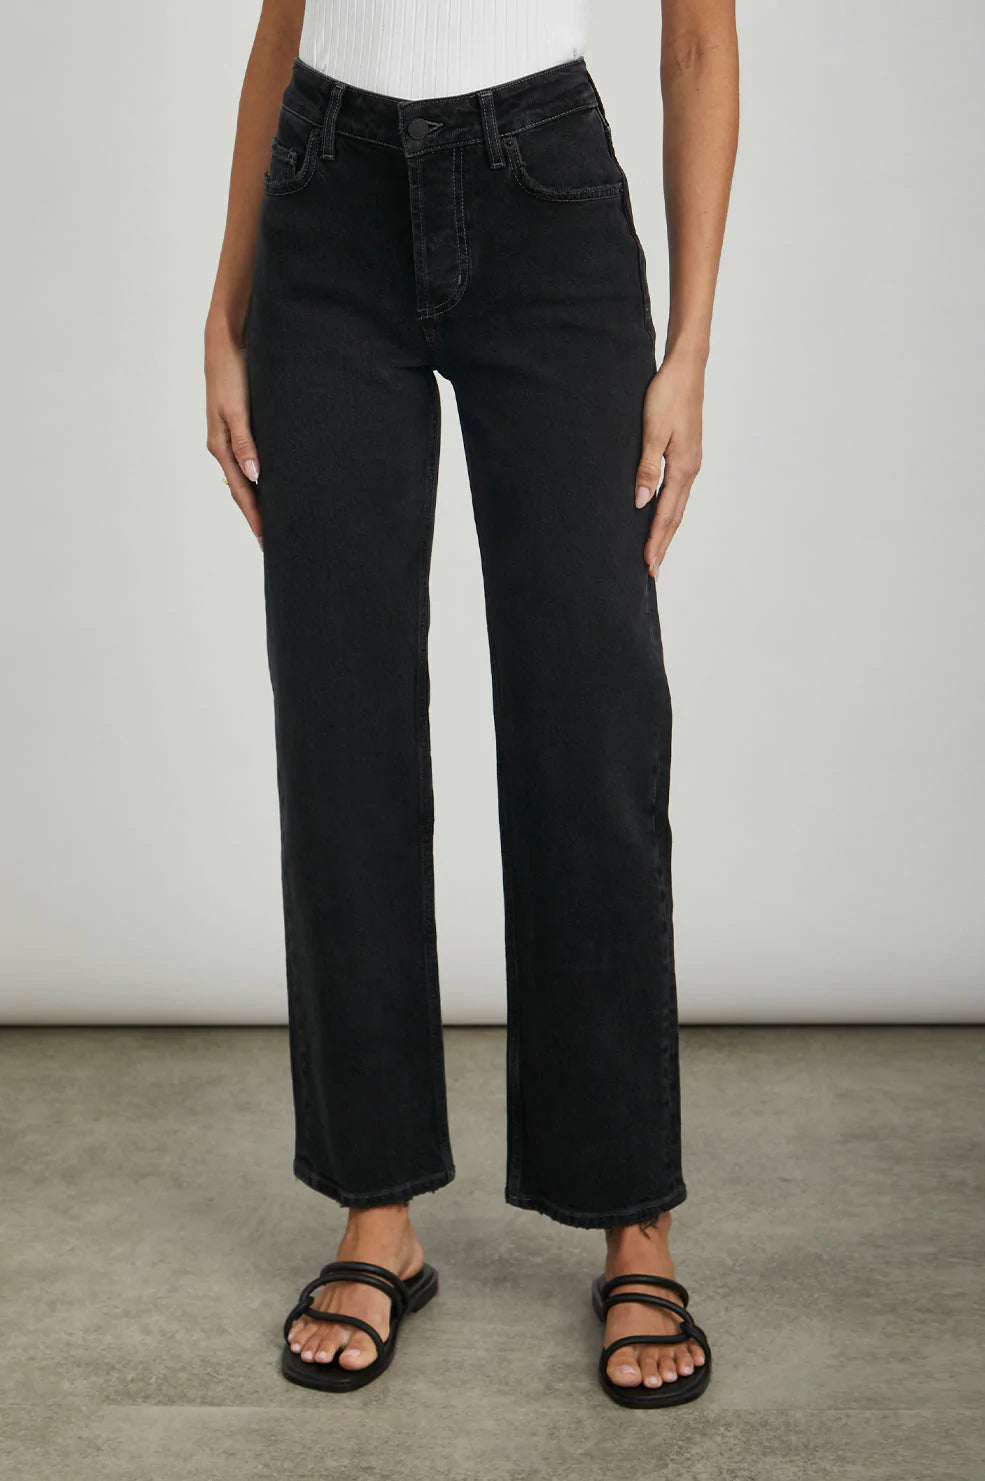 Washed black straight leg jeans with button fly